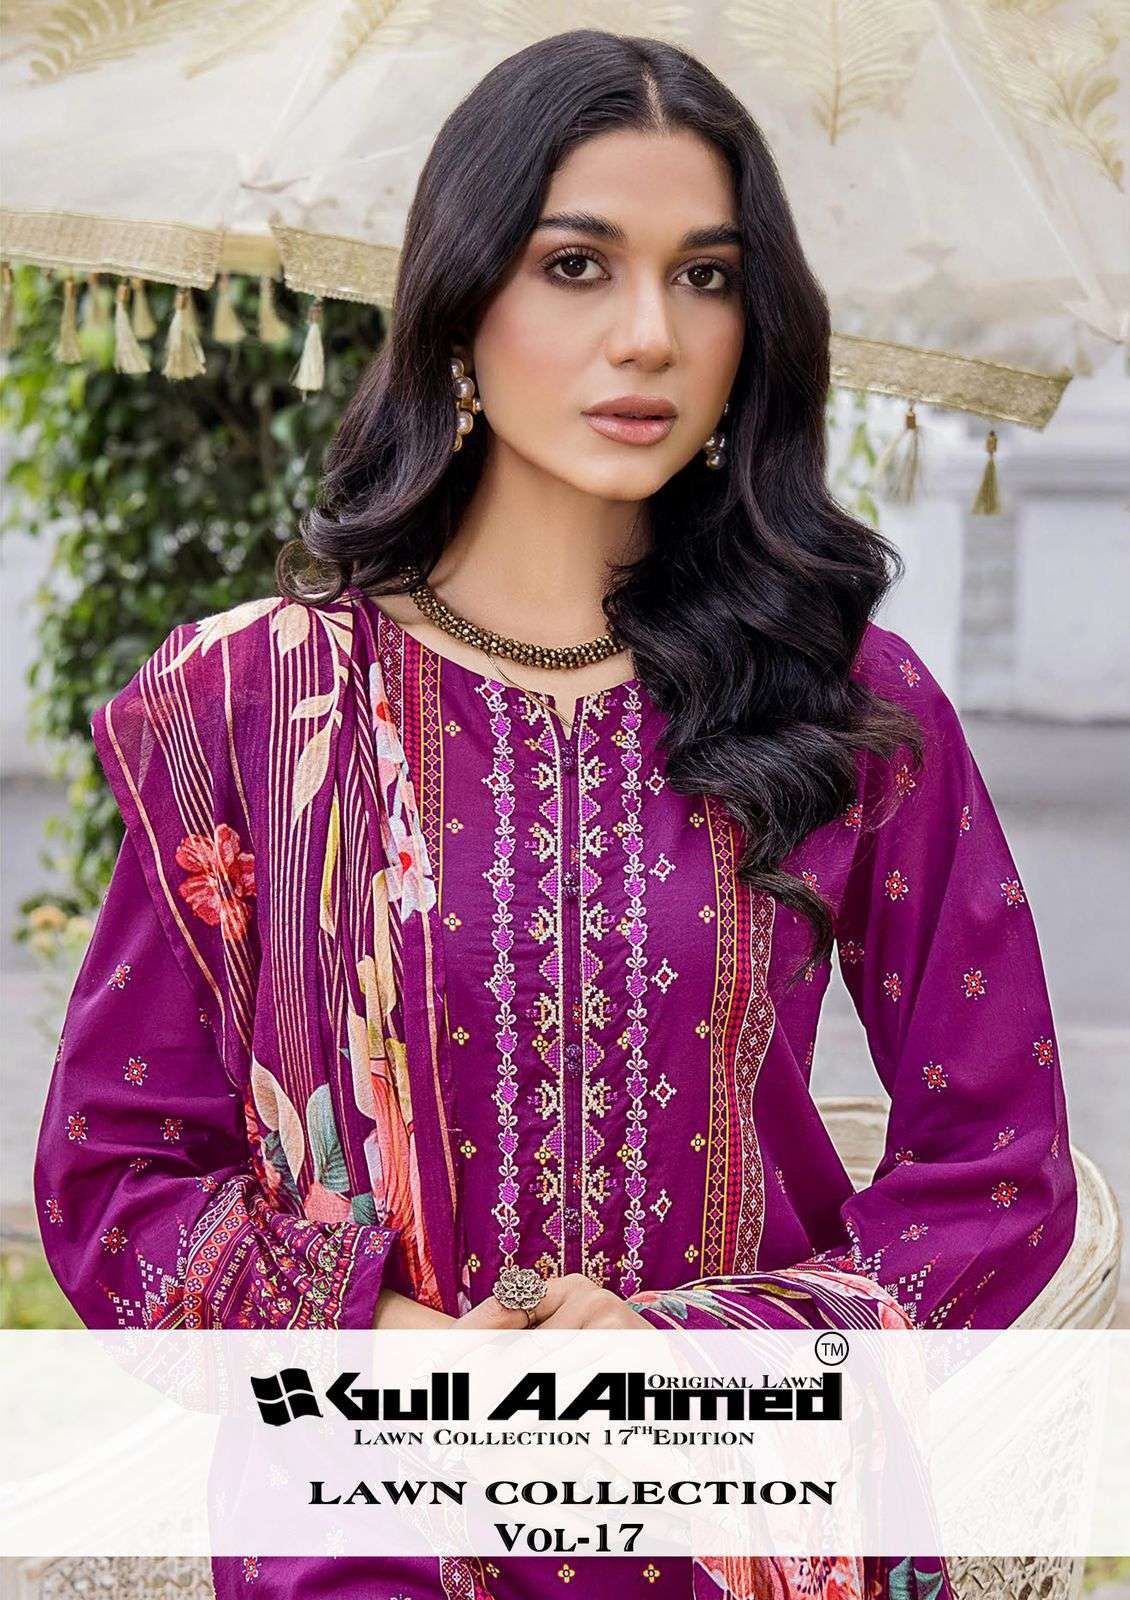 GULL AAHMED LAWN COLLECTION VOL 17